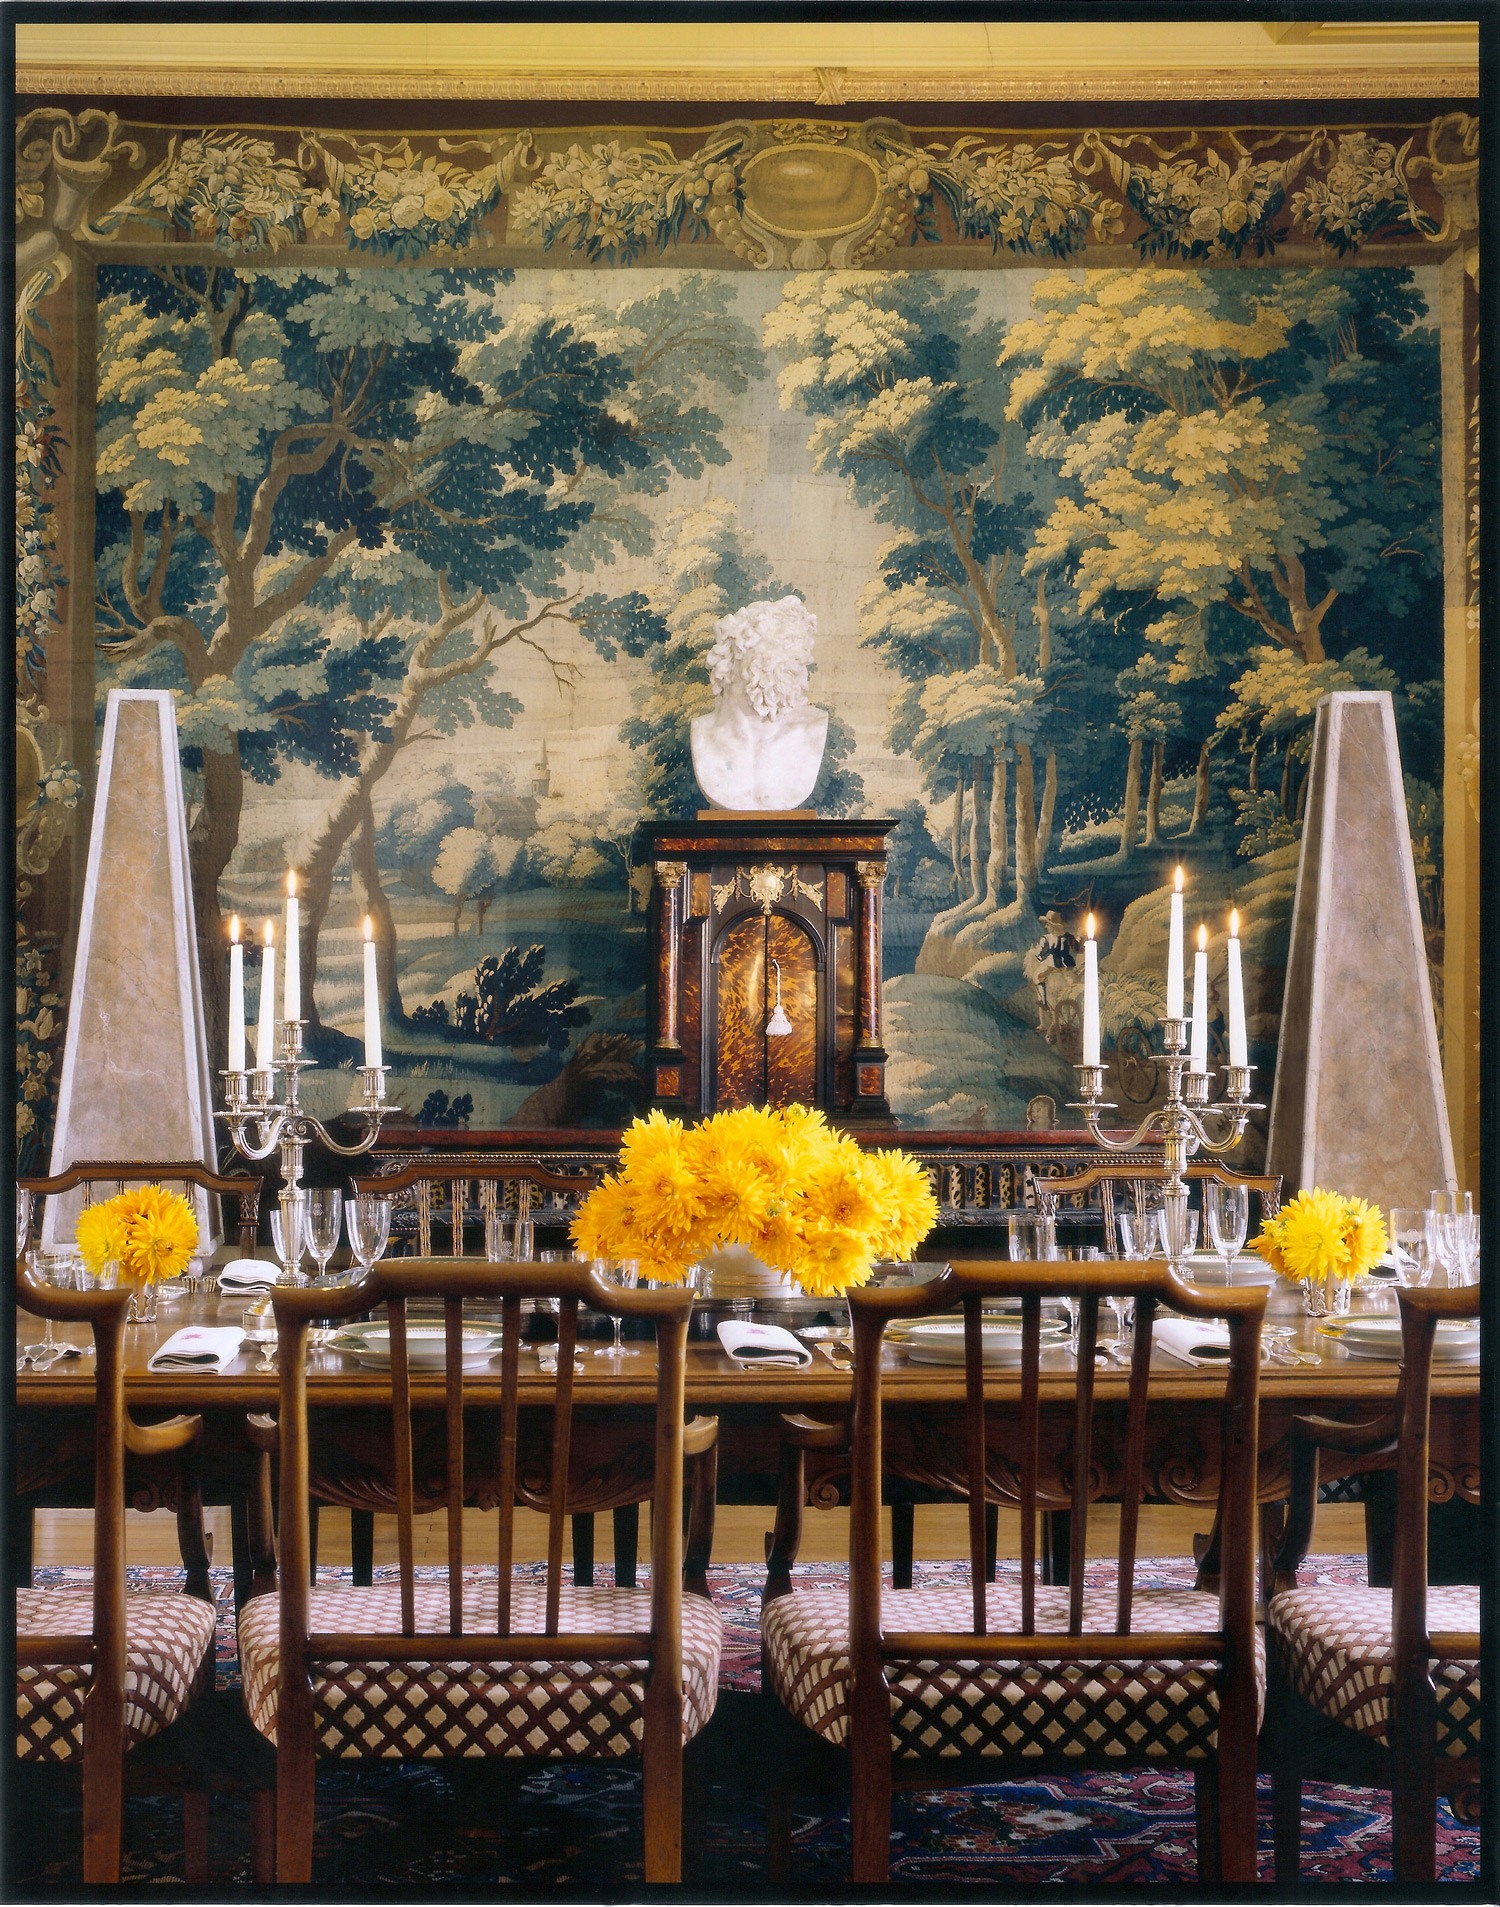   “In this dining room in France, I hung a 17th-century tapestry as a focal point. I love the depth and texture a tapestry brings to a room. I favor old ones for their faded colors and textures, but there are many beautiful modern tapestries as well, and they are often affordable.” Photo: Marina Faust  